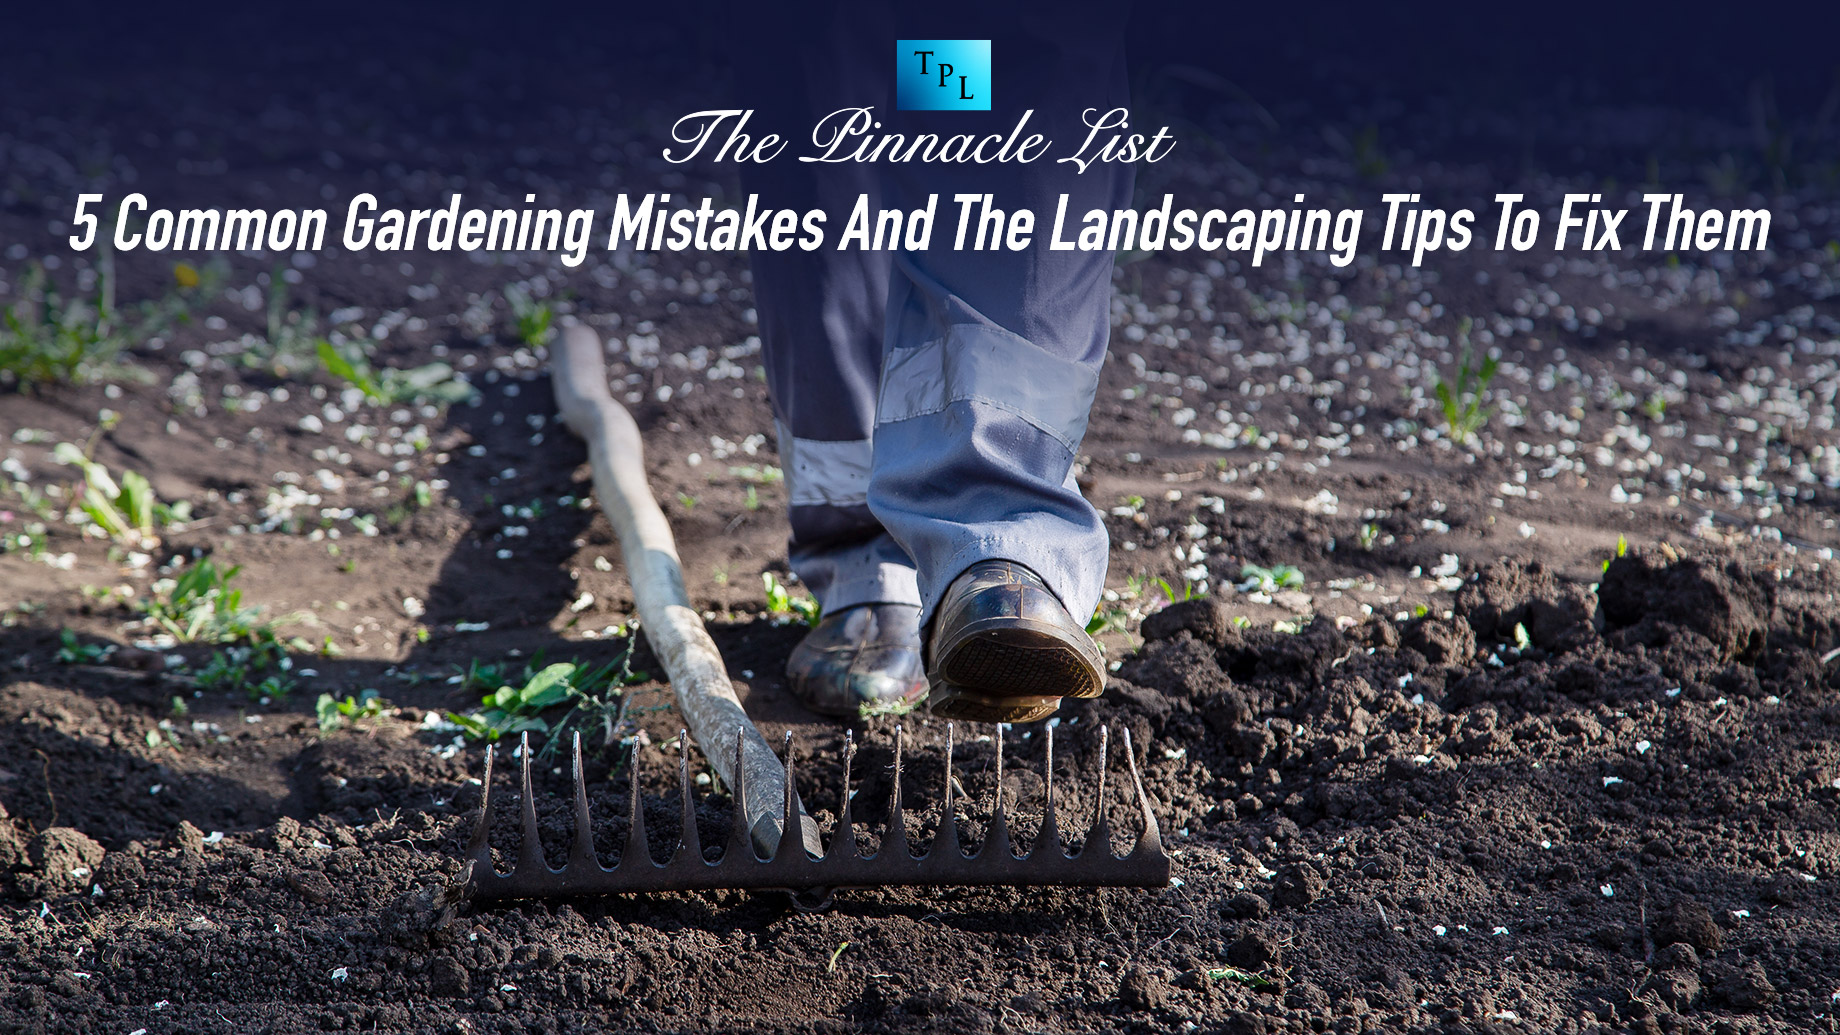 5 Common Gardening Mistakes And The Landscaping Tips To Fix Them